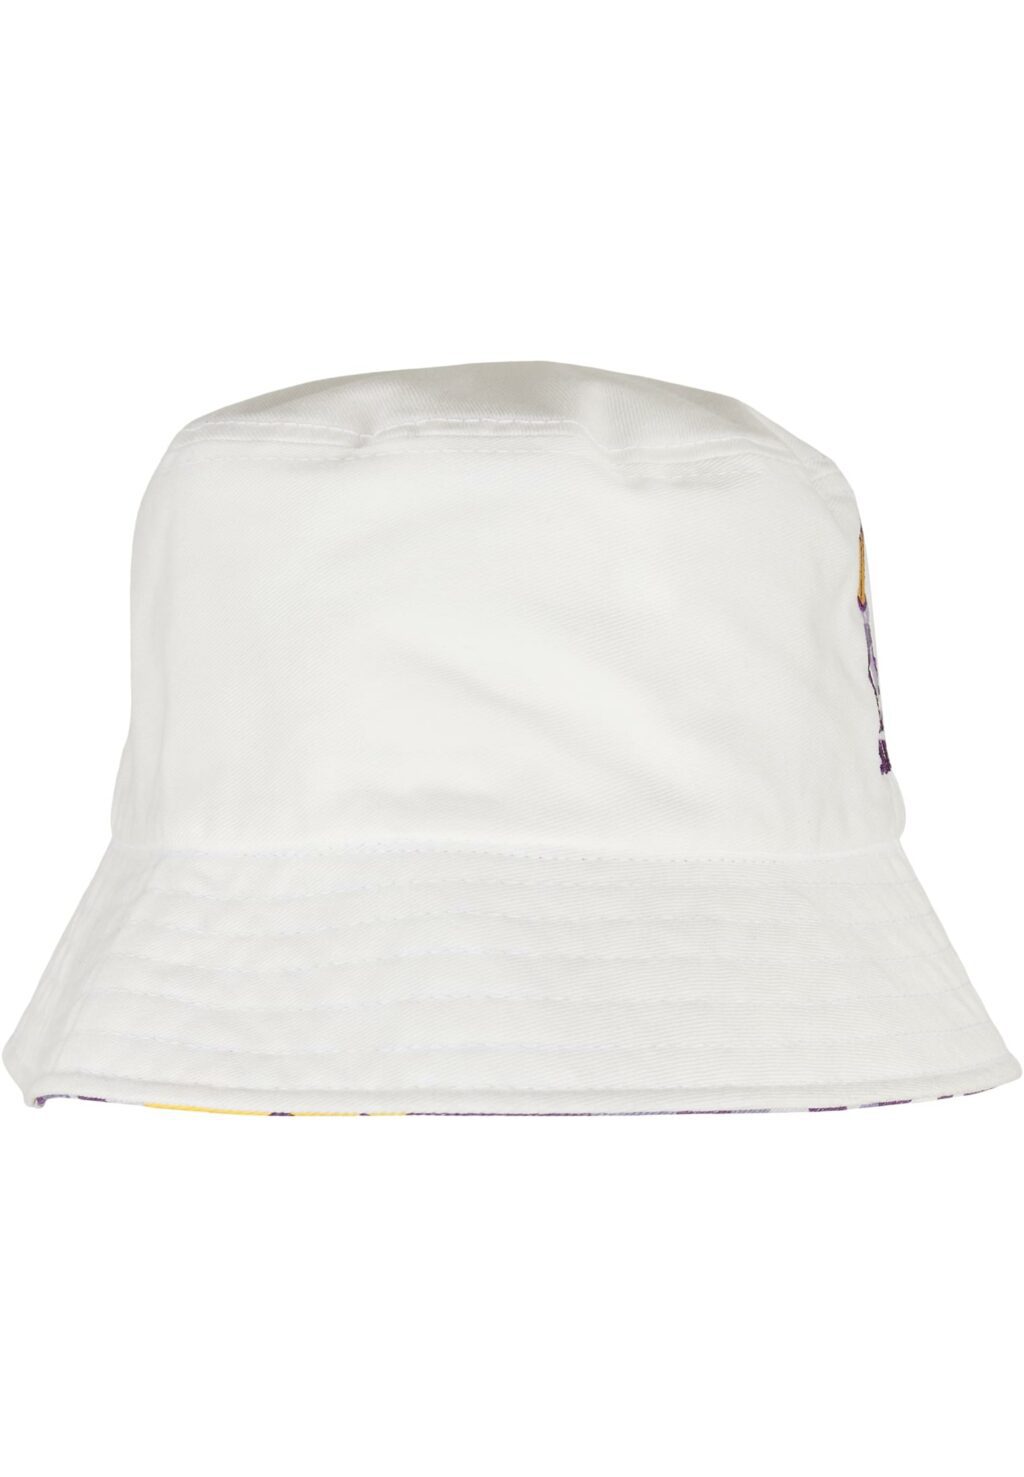 Reversible Airball Bucket Hat white one ST254